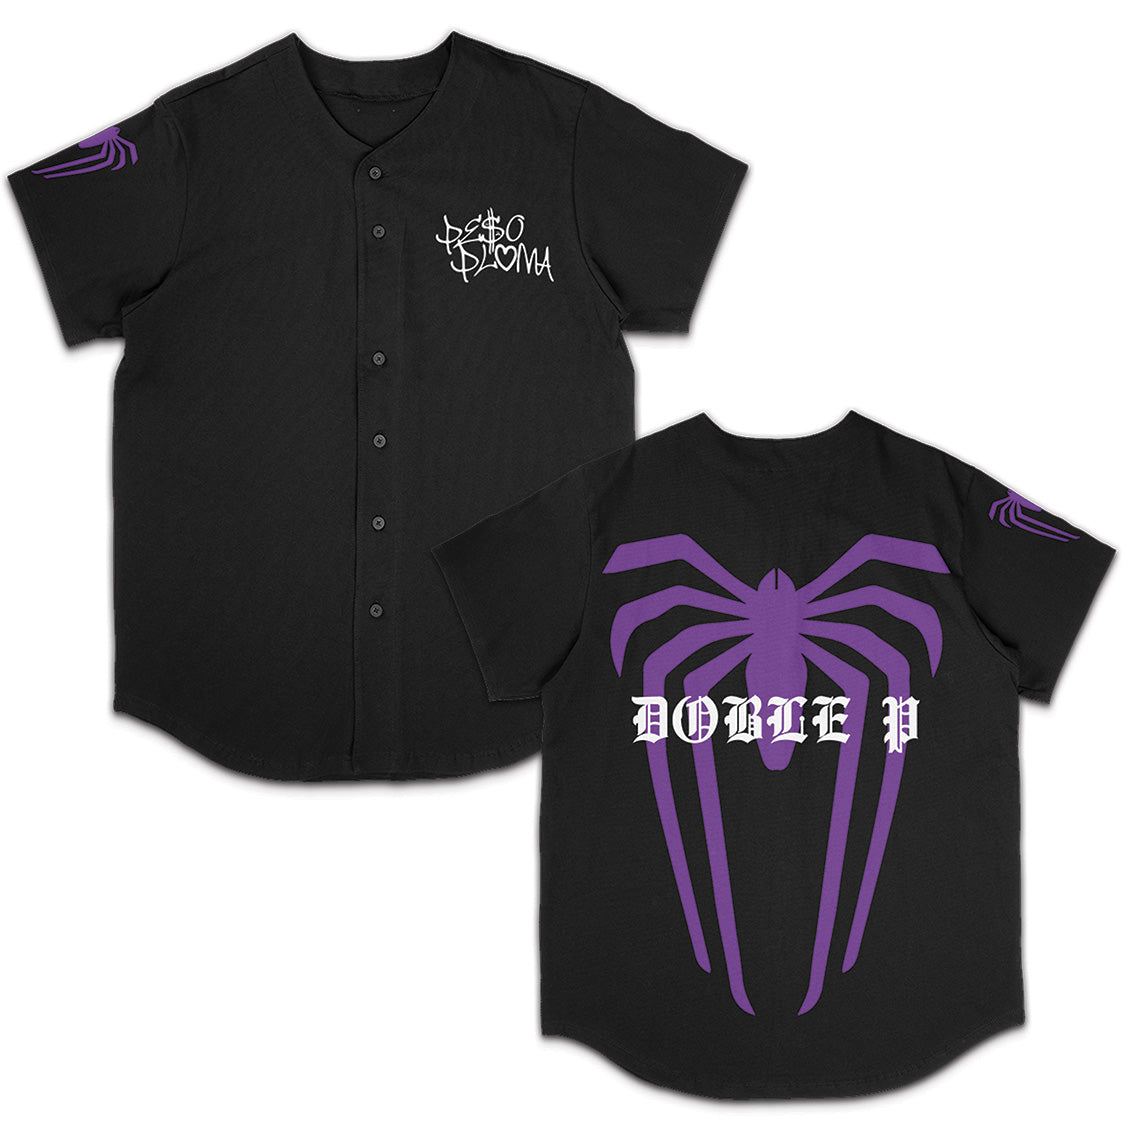 SPIDER JERSEY & TEES